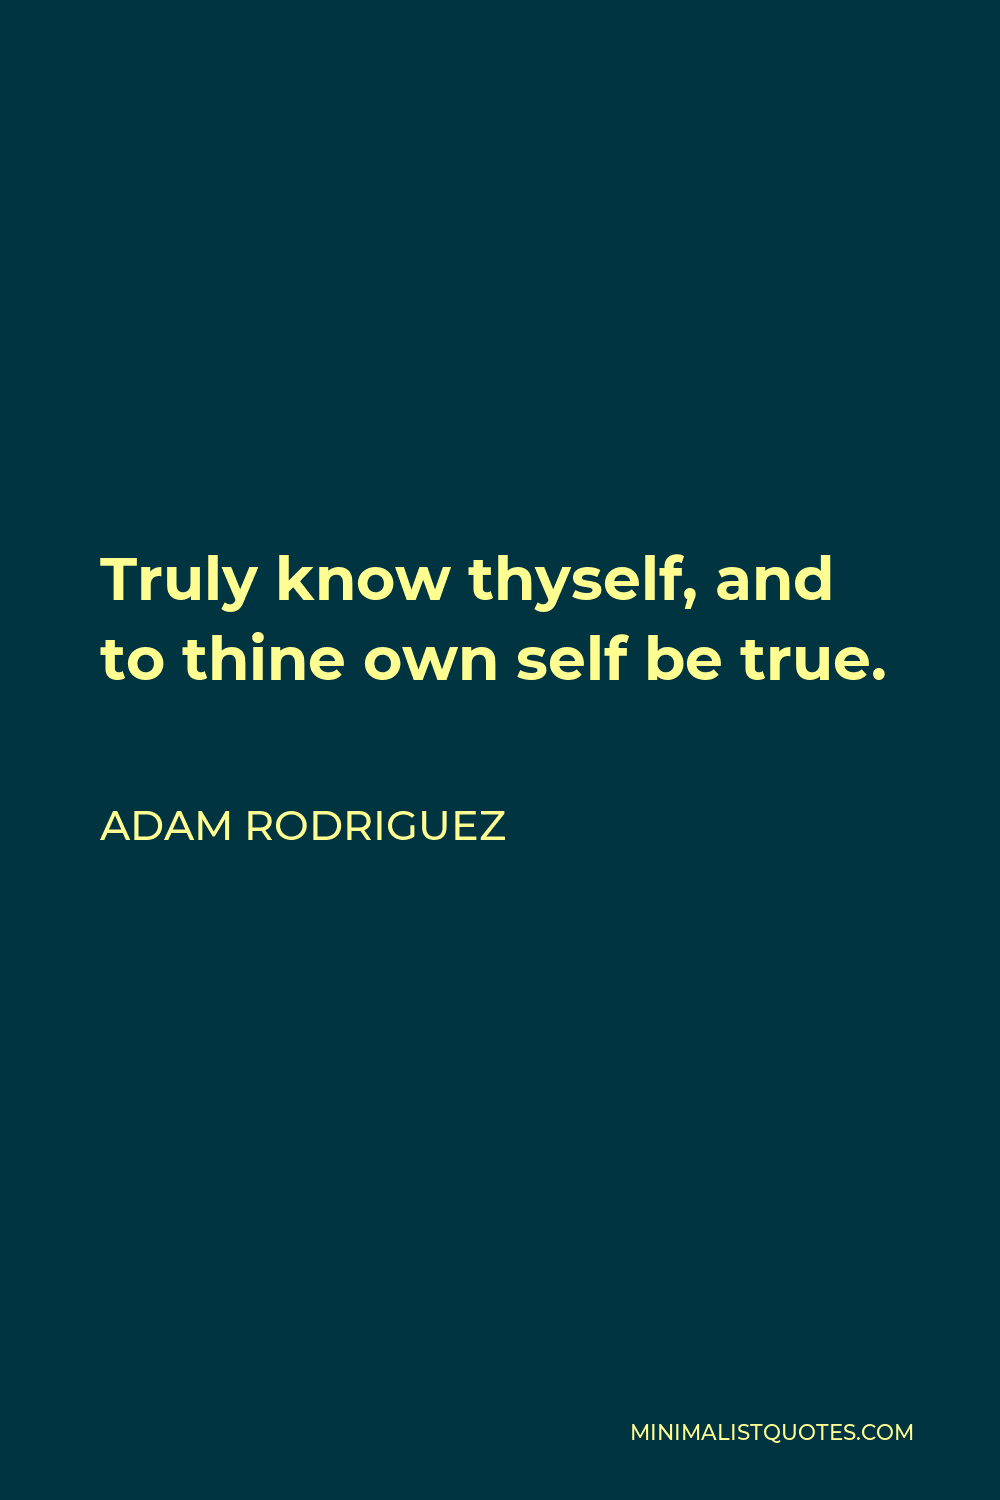 Adam Rodriguez Quote - Truly know thyself, and to thine own self be true.